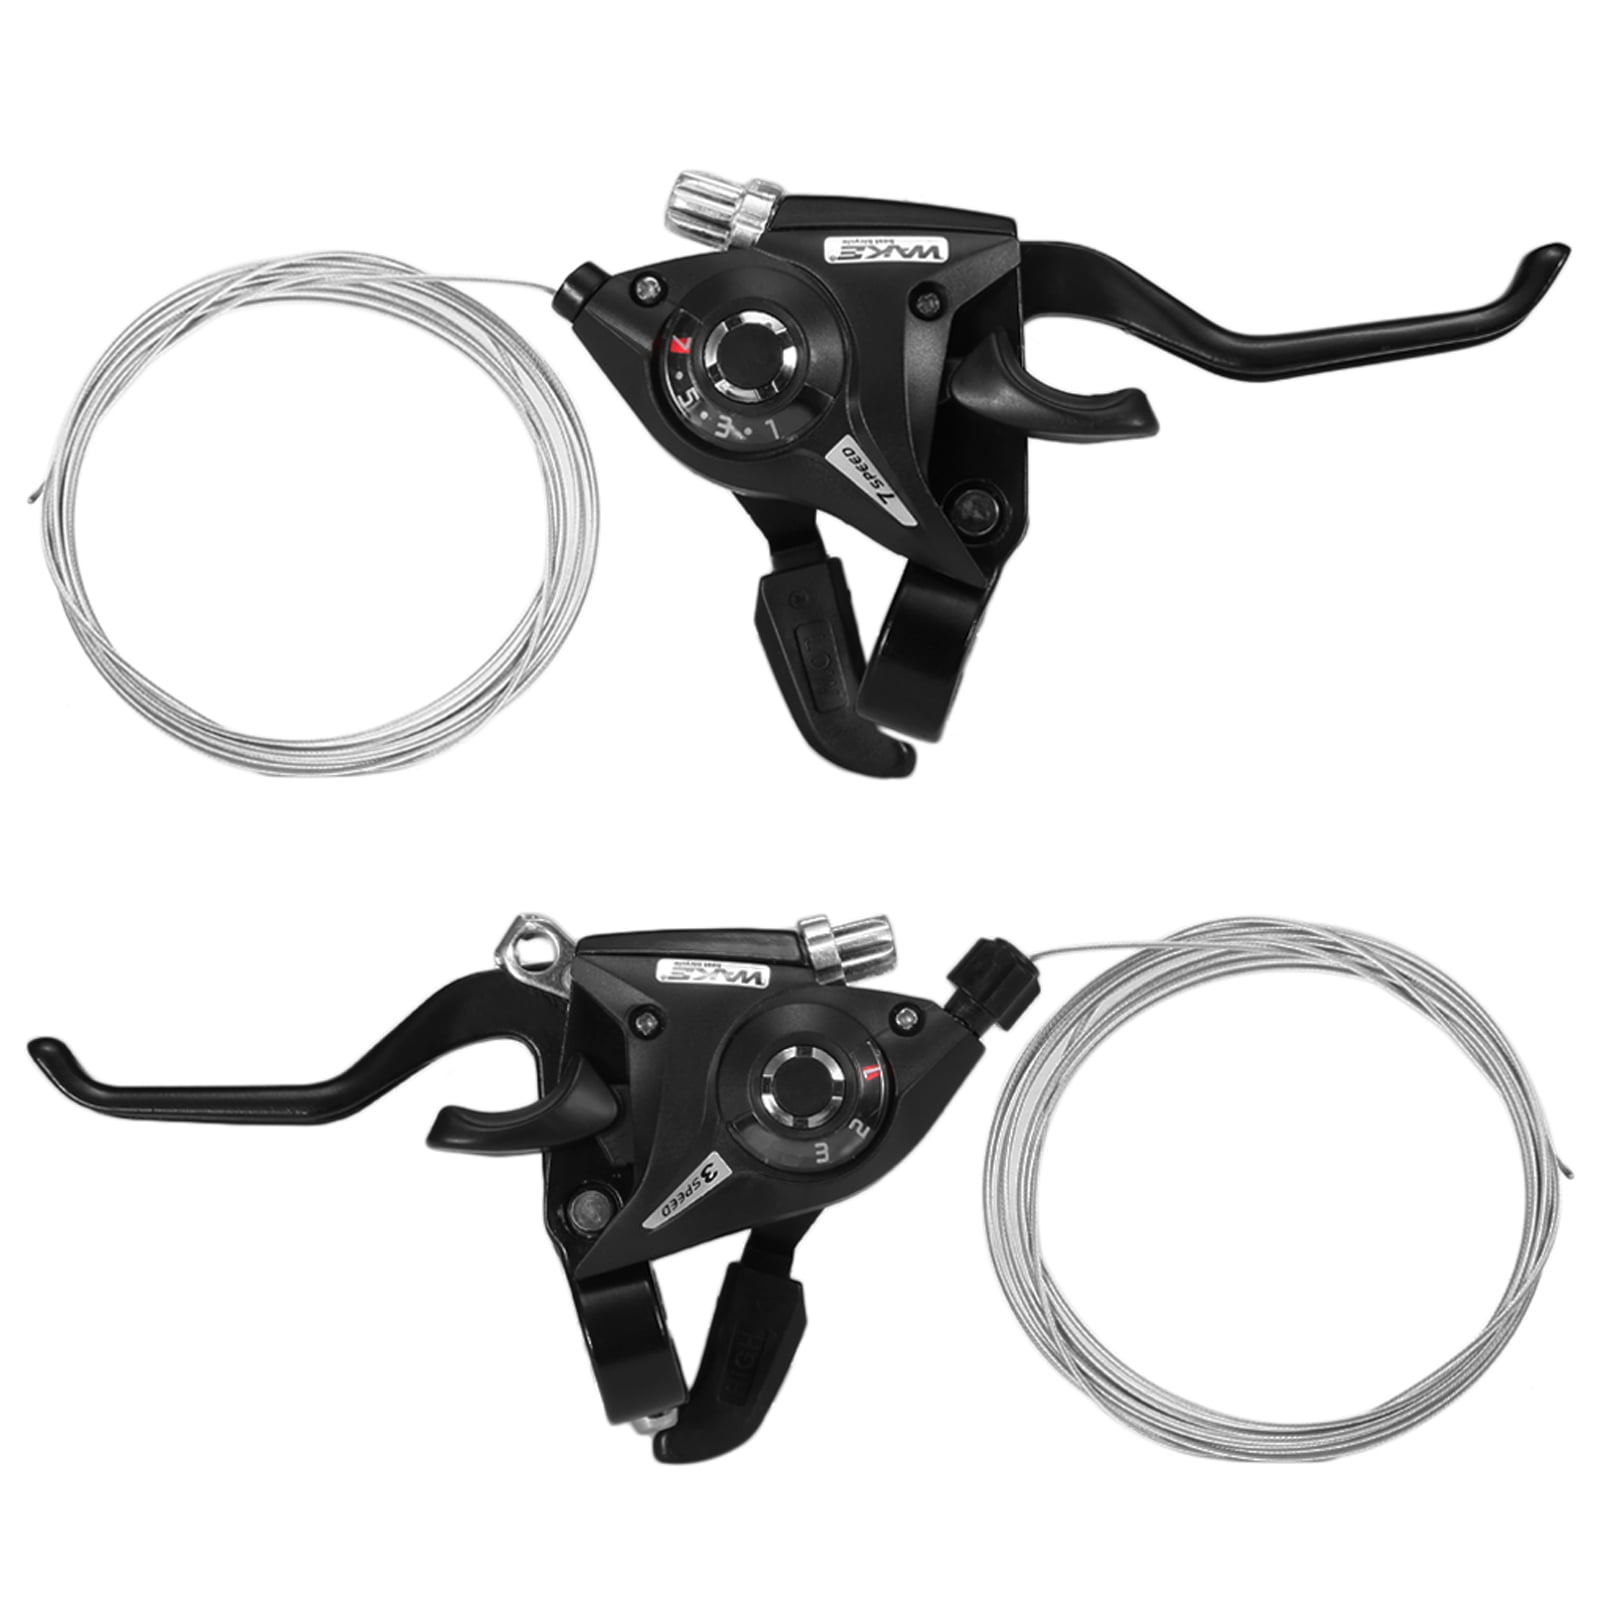 Speed Gear Lever Shifters Trigger Bicycle Cycling MTB for Transmission Black UK